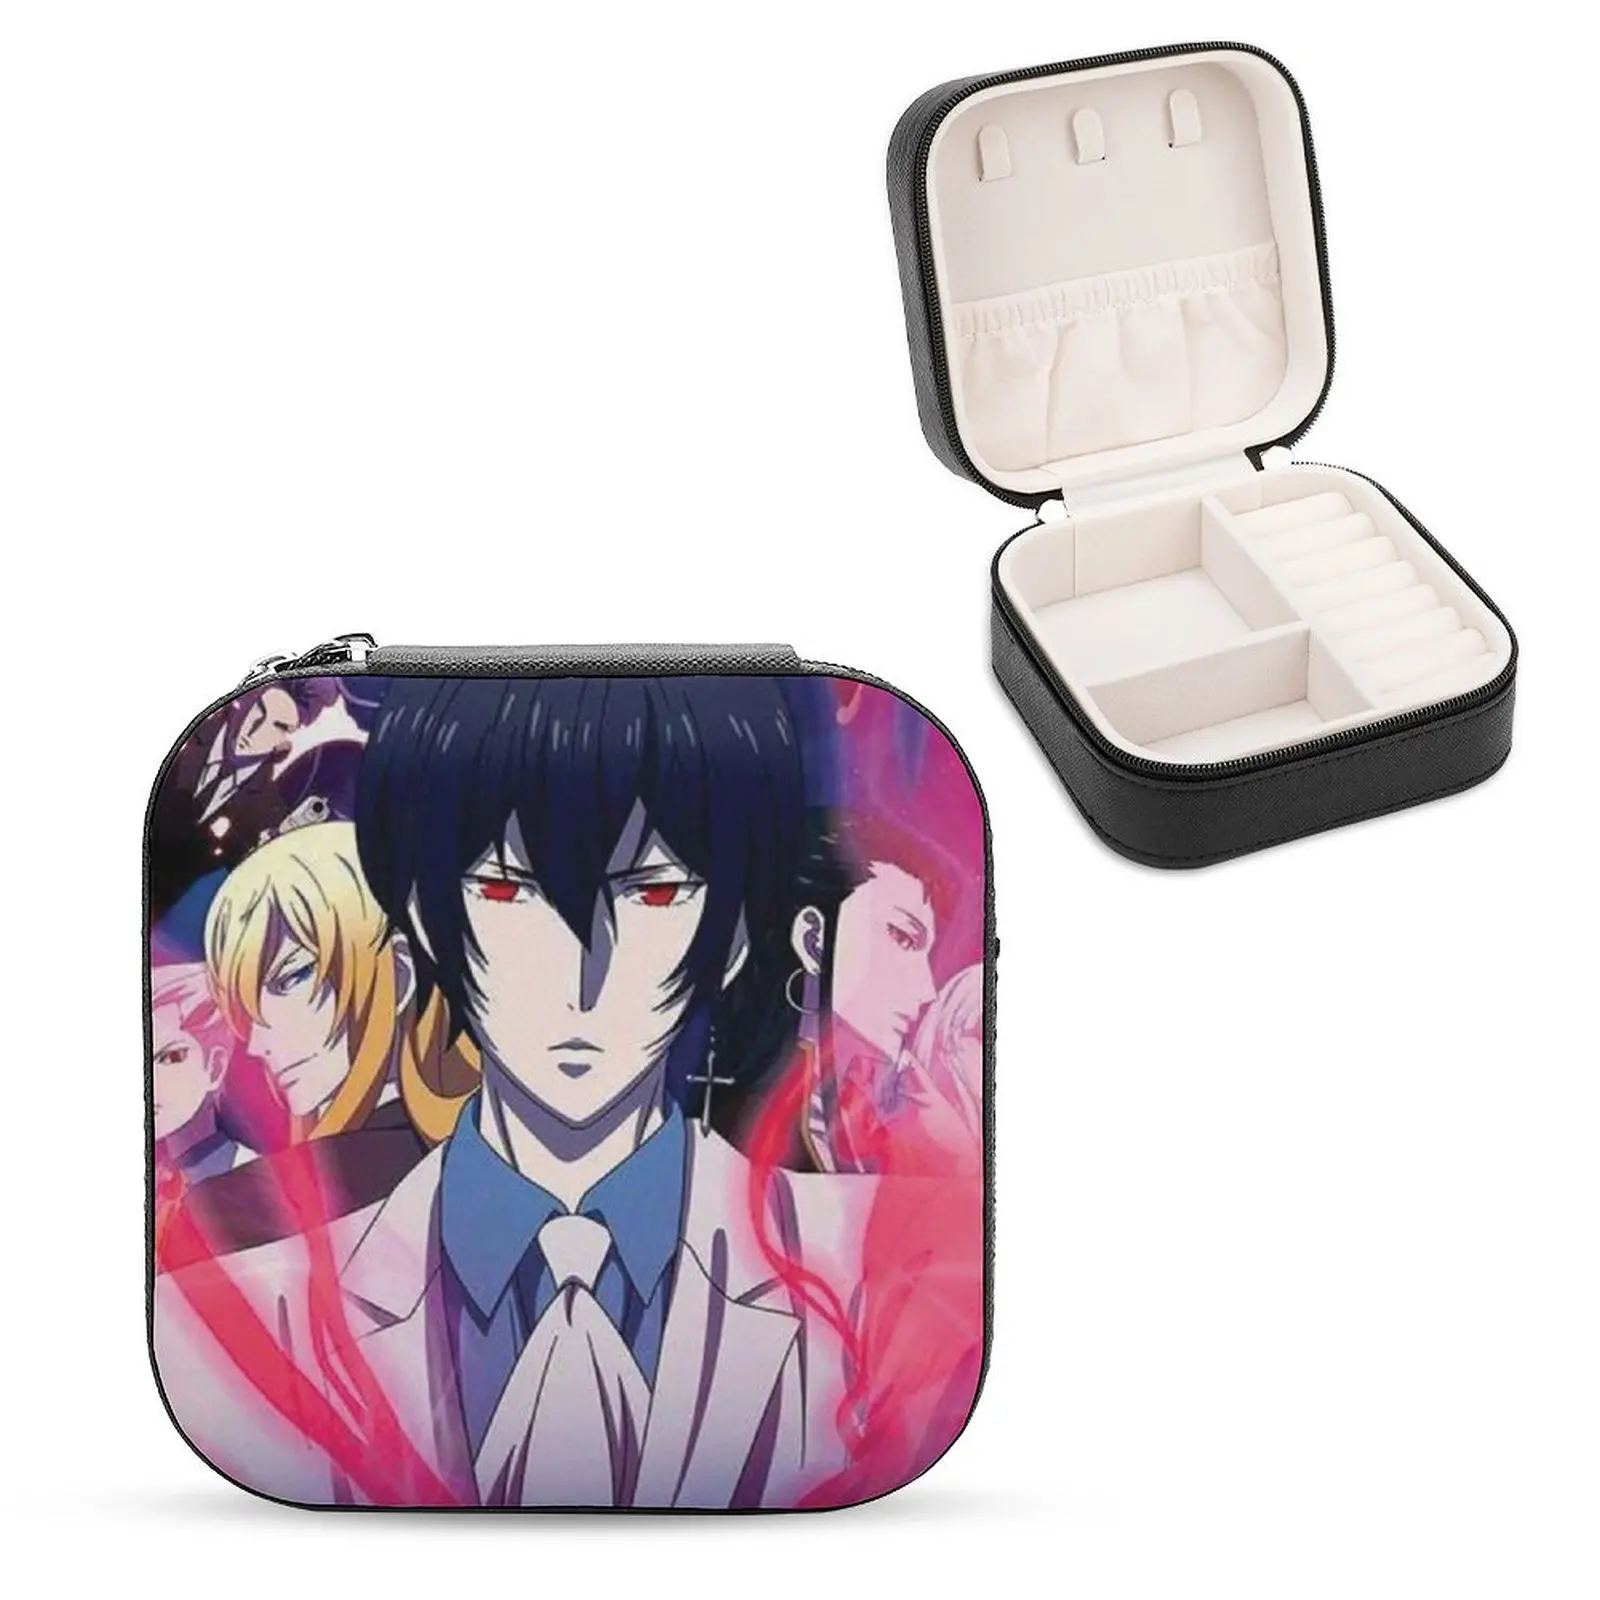 Official Jewelry Boxes from movies comics anime video games TV series  music characters and celebrities  SFmovie store